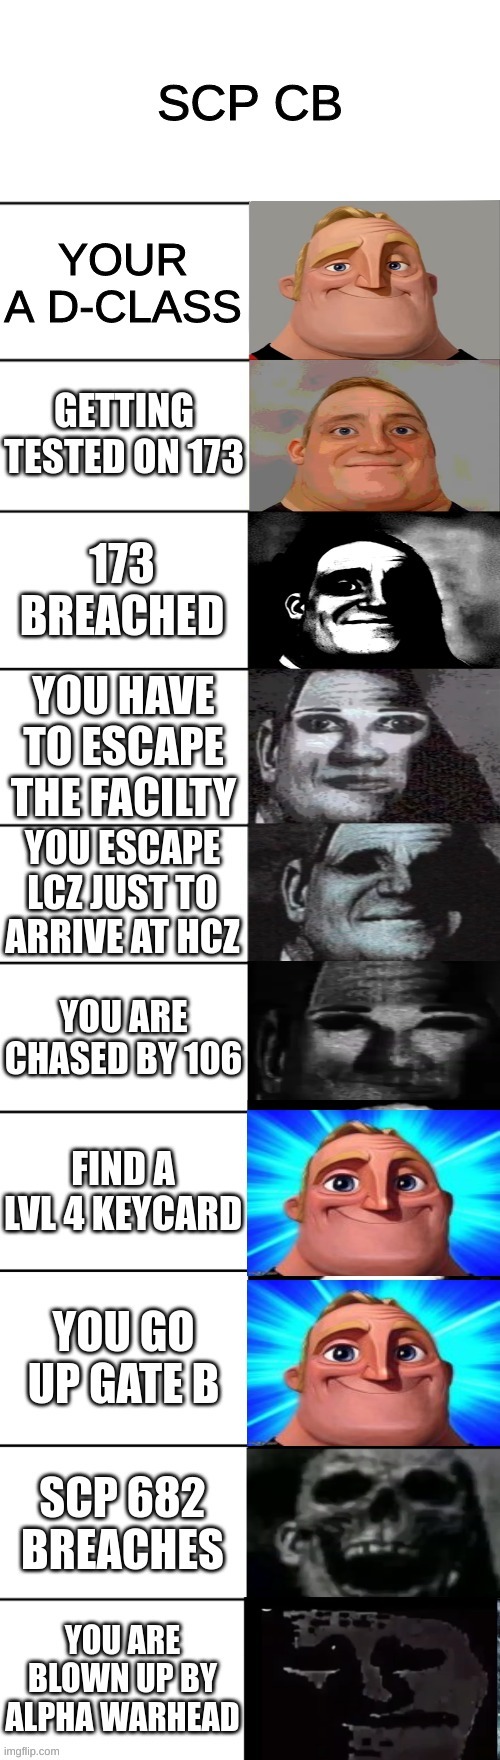 SCP CB Becoming Uncanny | image tagged in mr incredible becoming uncanny,scp,video games | made w/ Imgflip meme maker